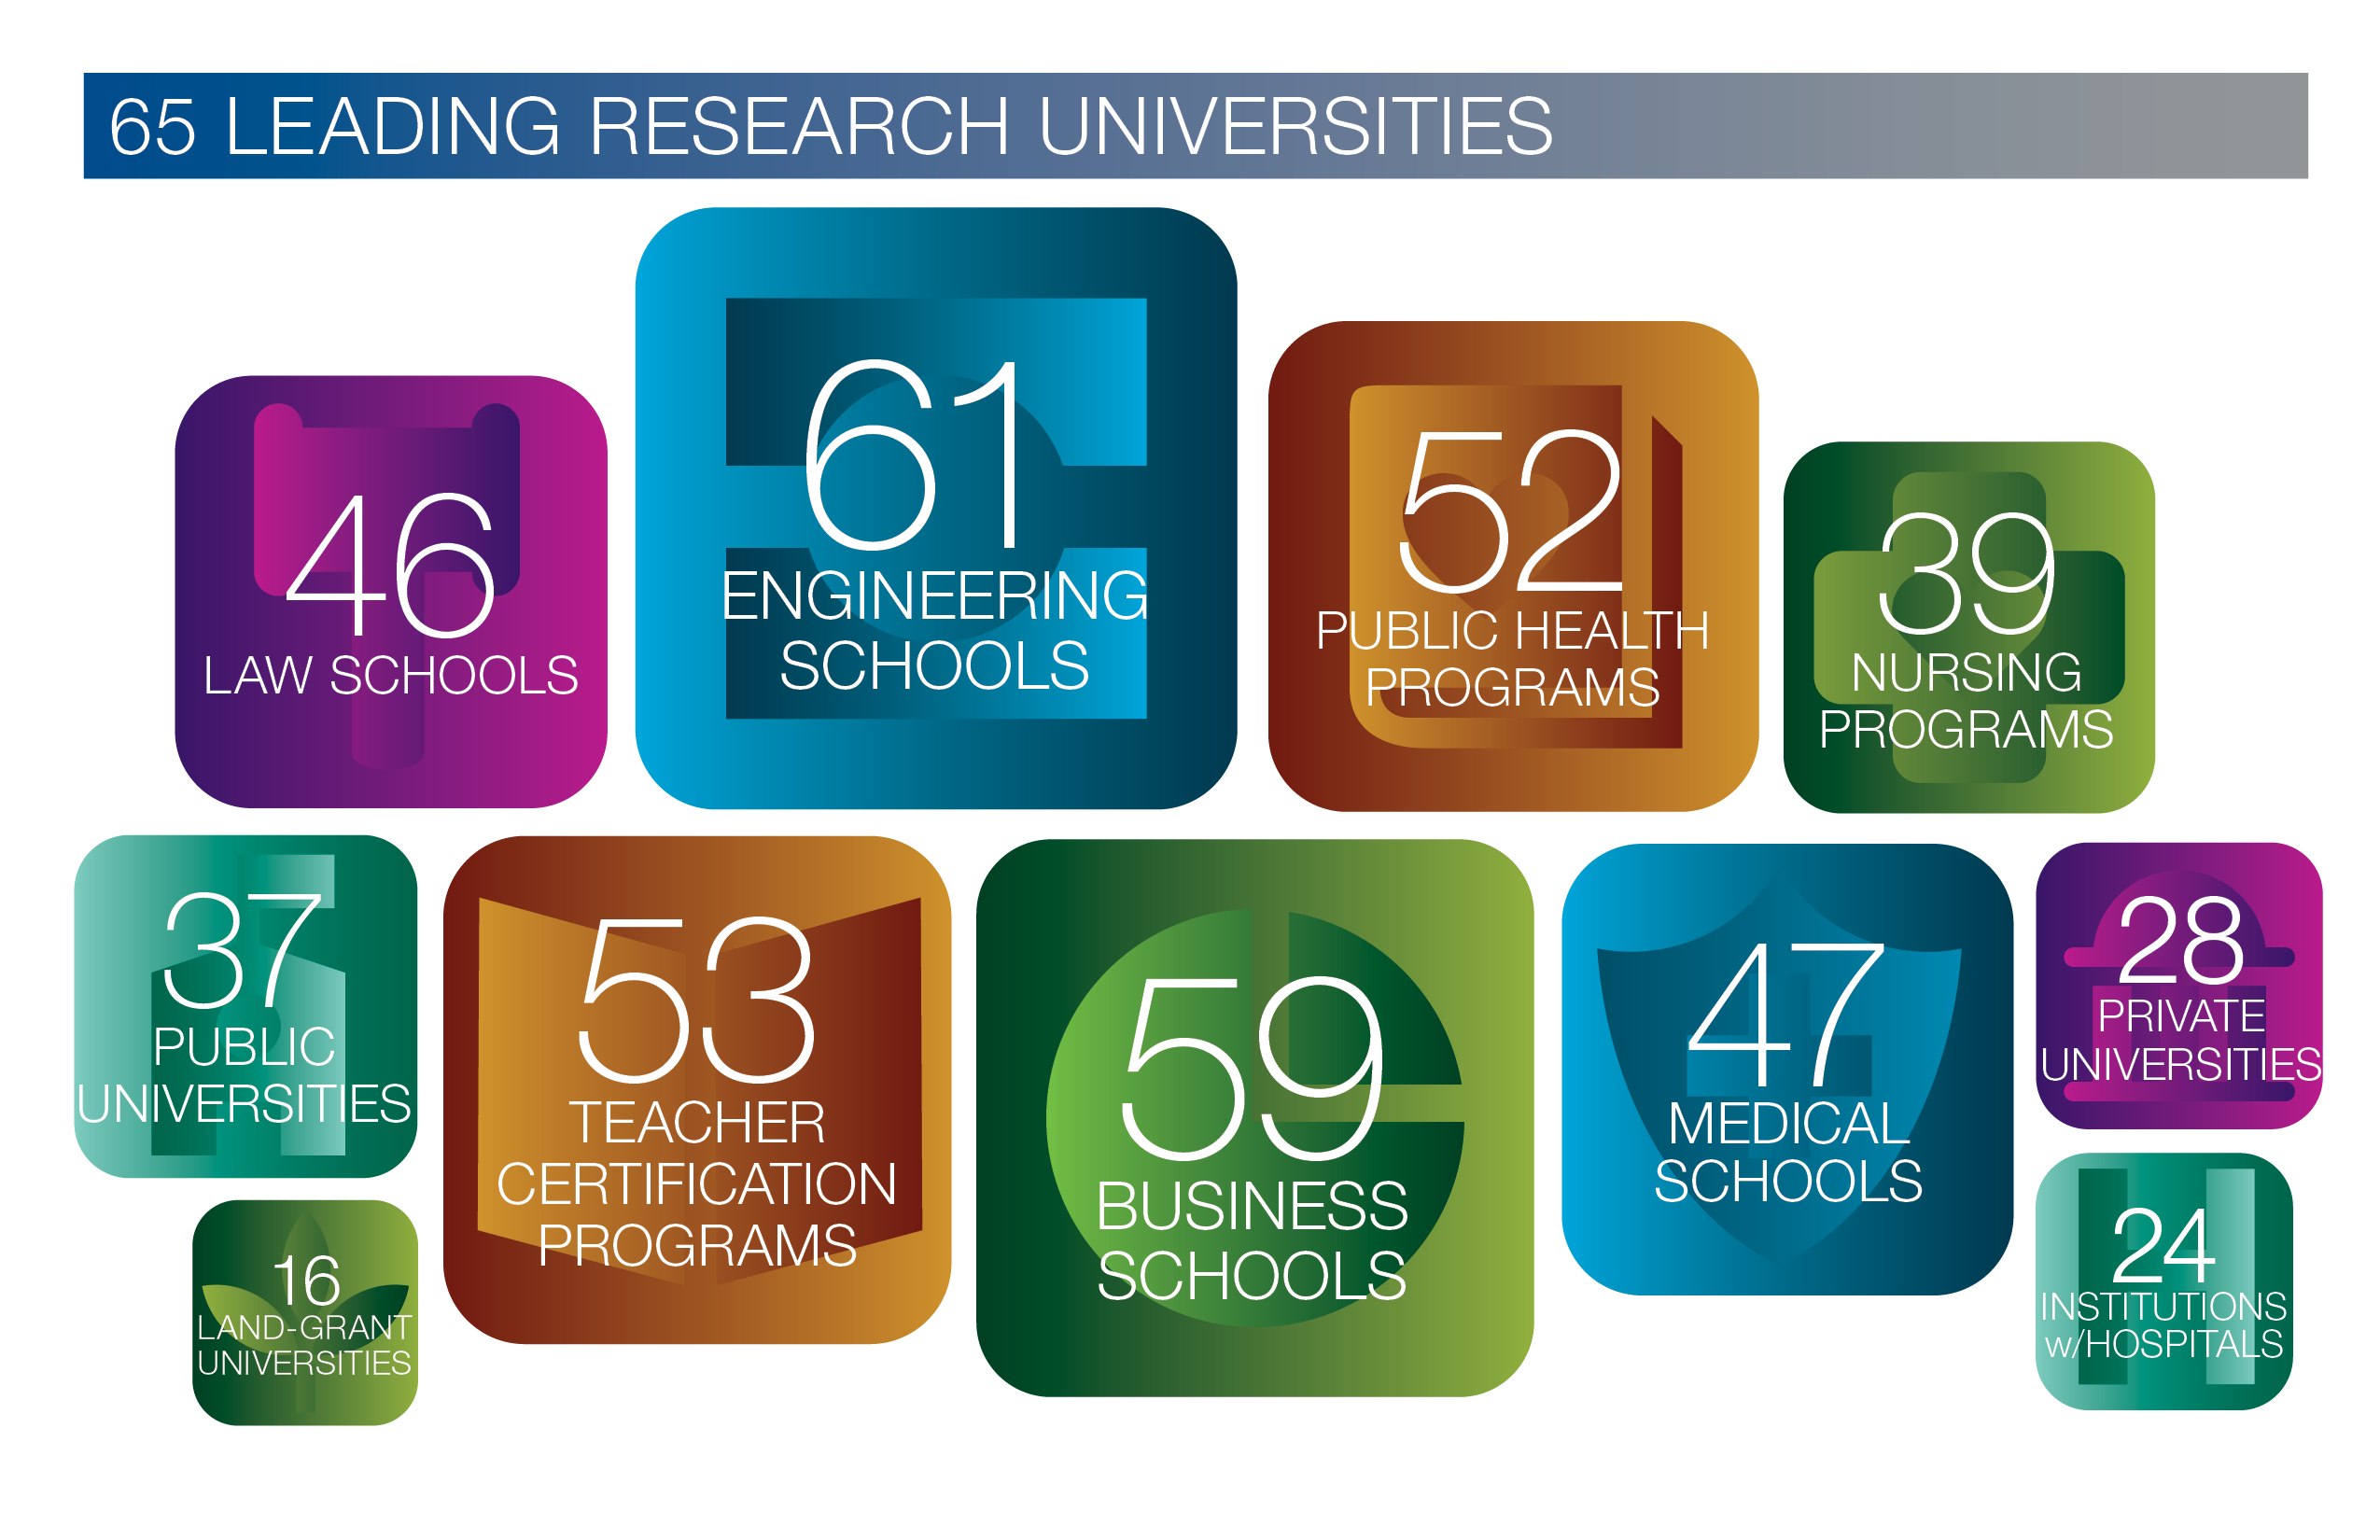 By the Numbers Association of American Universities (AAU)